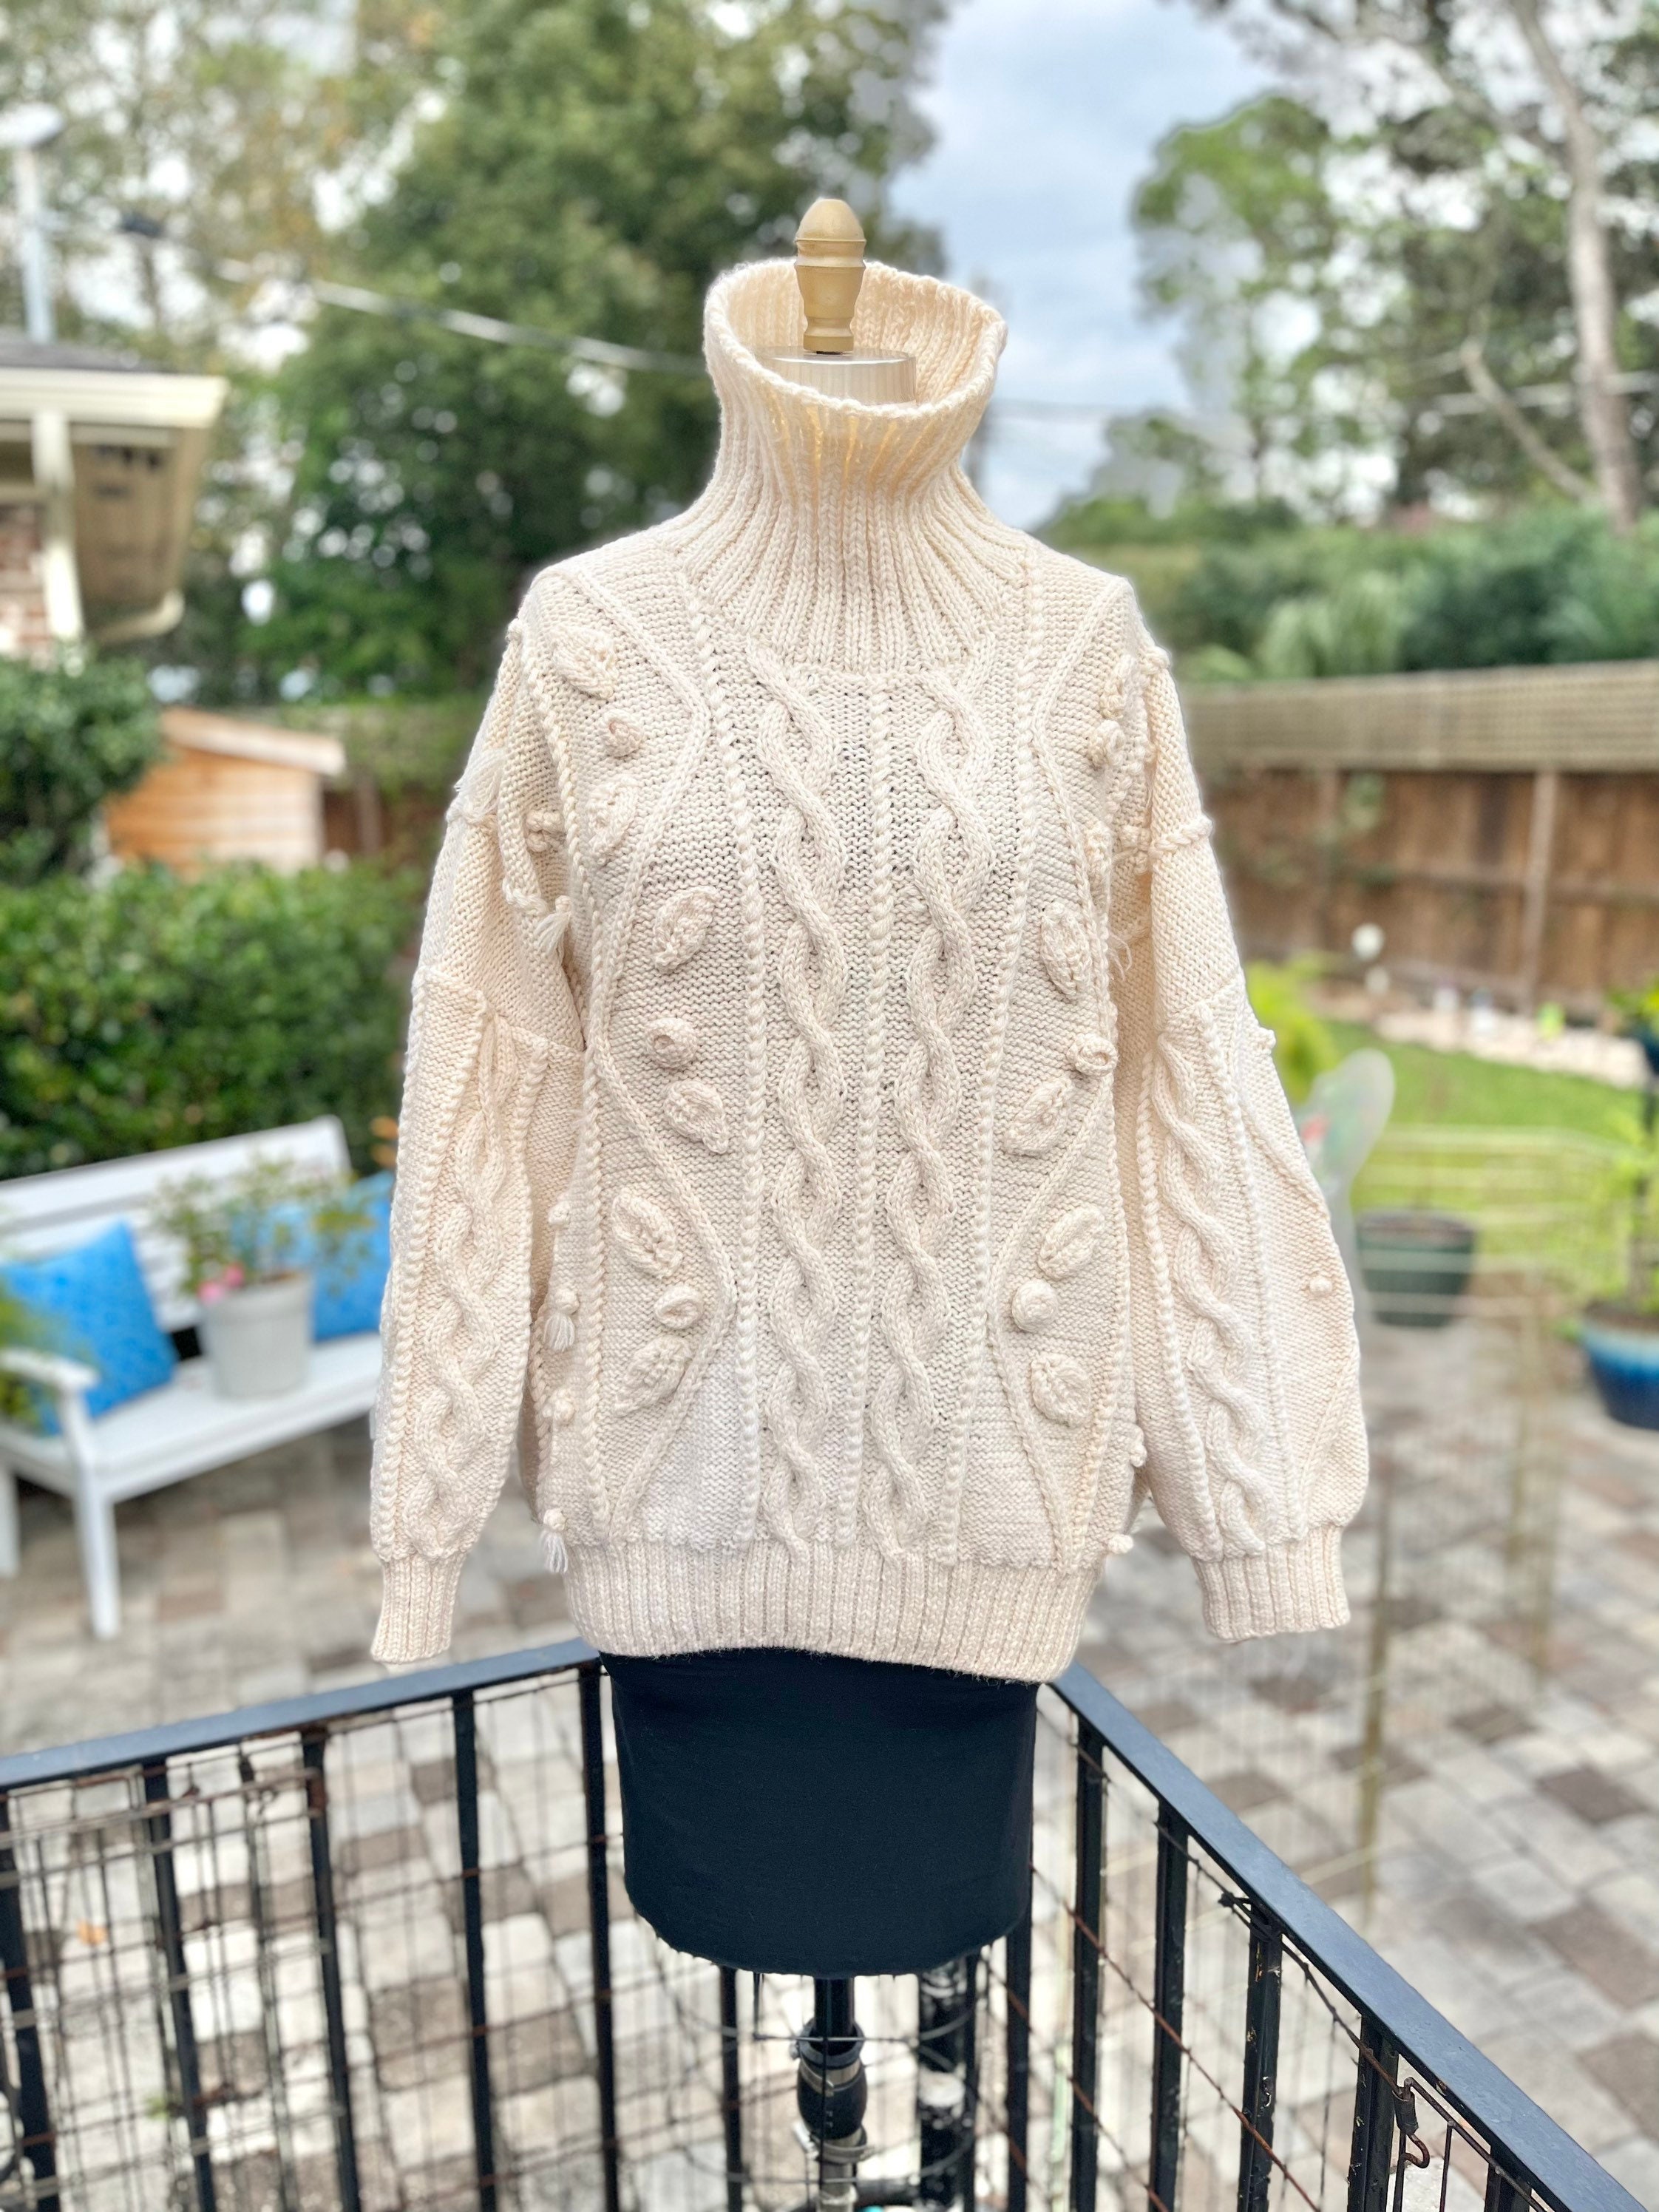 Vintage Hand Knit Sweater - Etsy